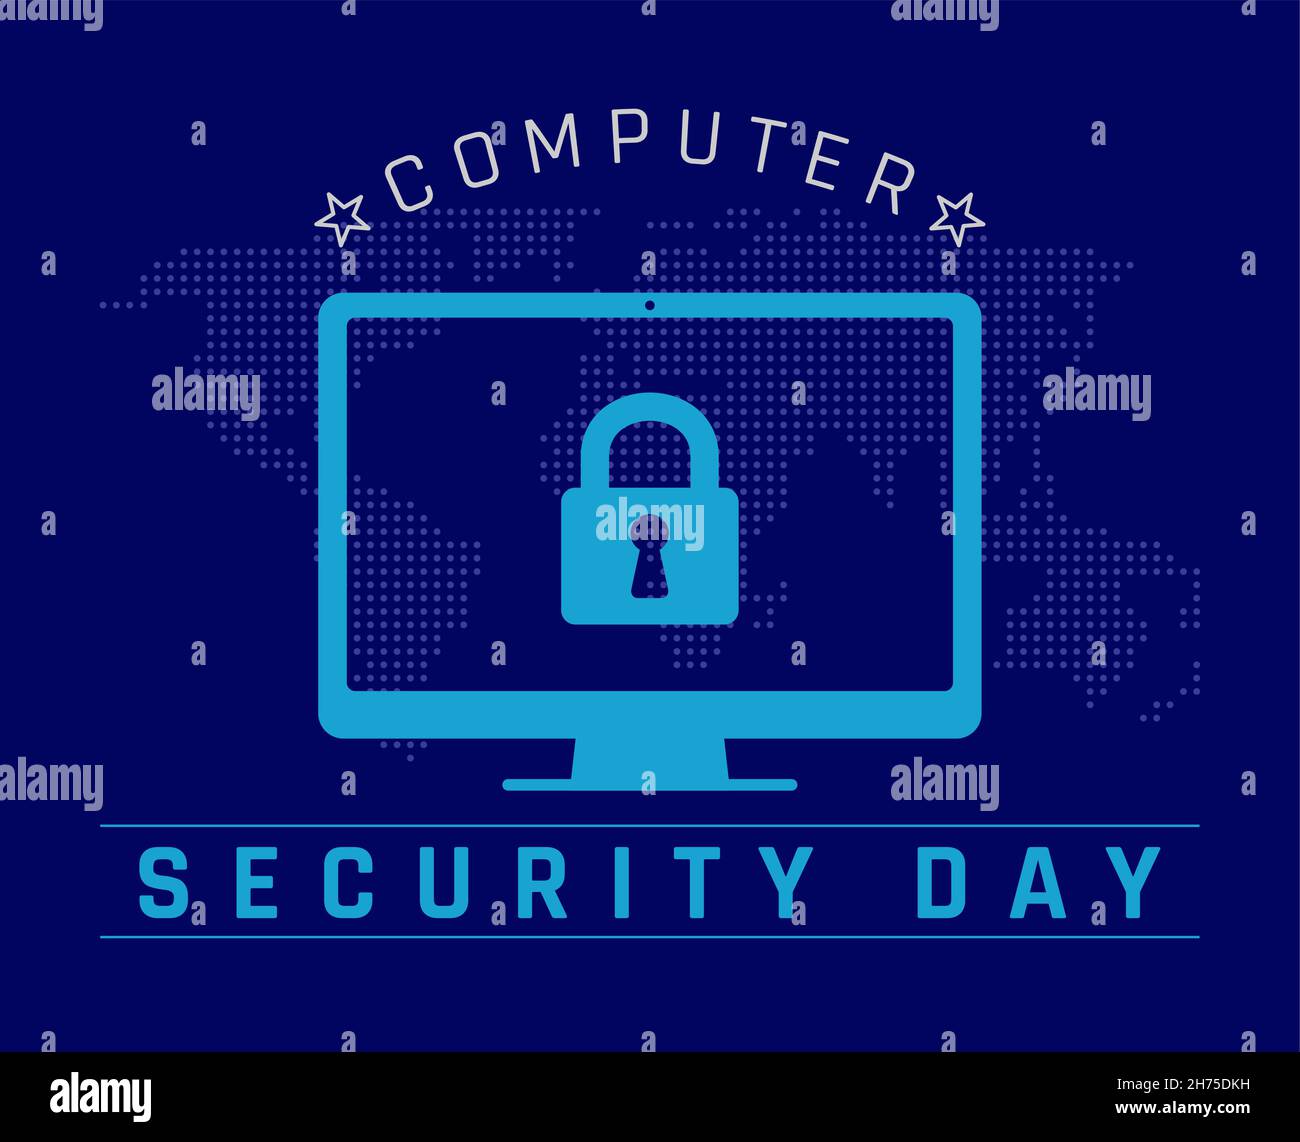 Computer Security Day. Vector stock illustration. Stock Vector